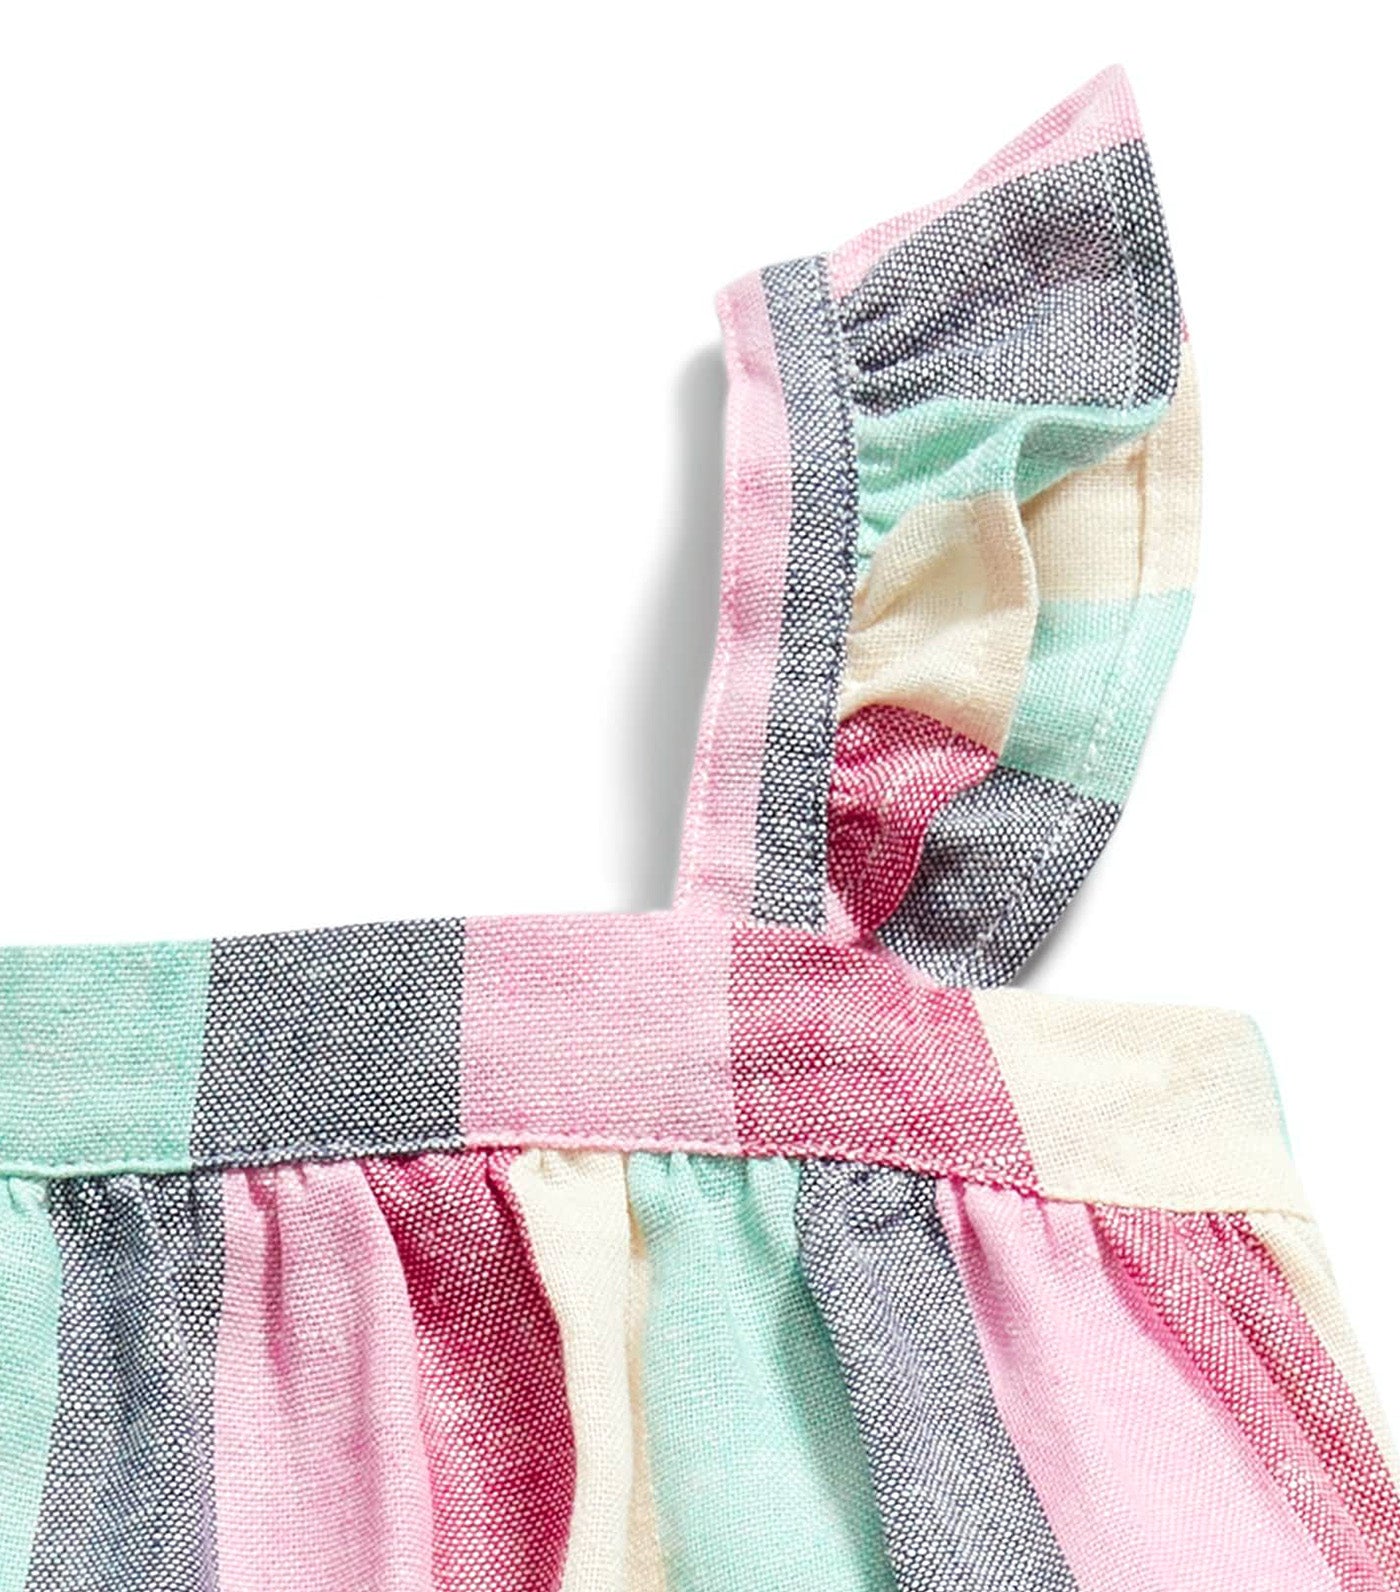 Sleeveless Striped Linen-Blend Top and Bloomer Shorts Set for Baby